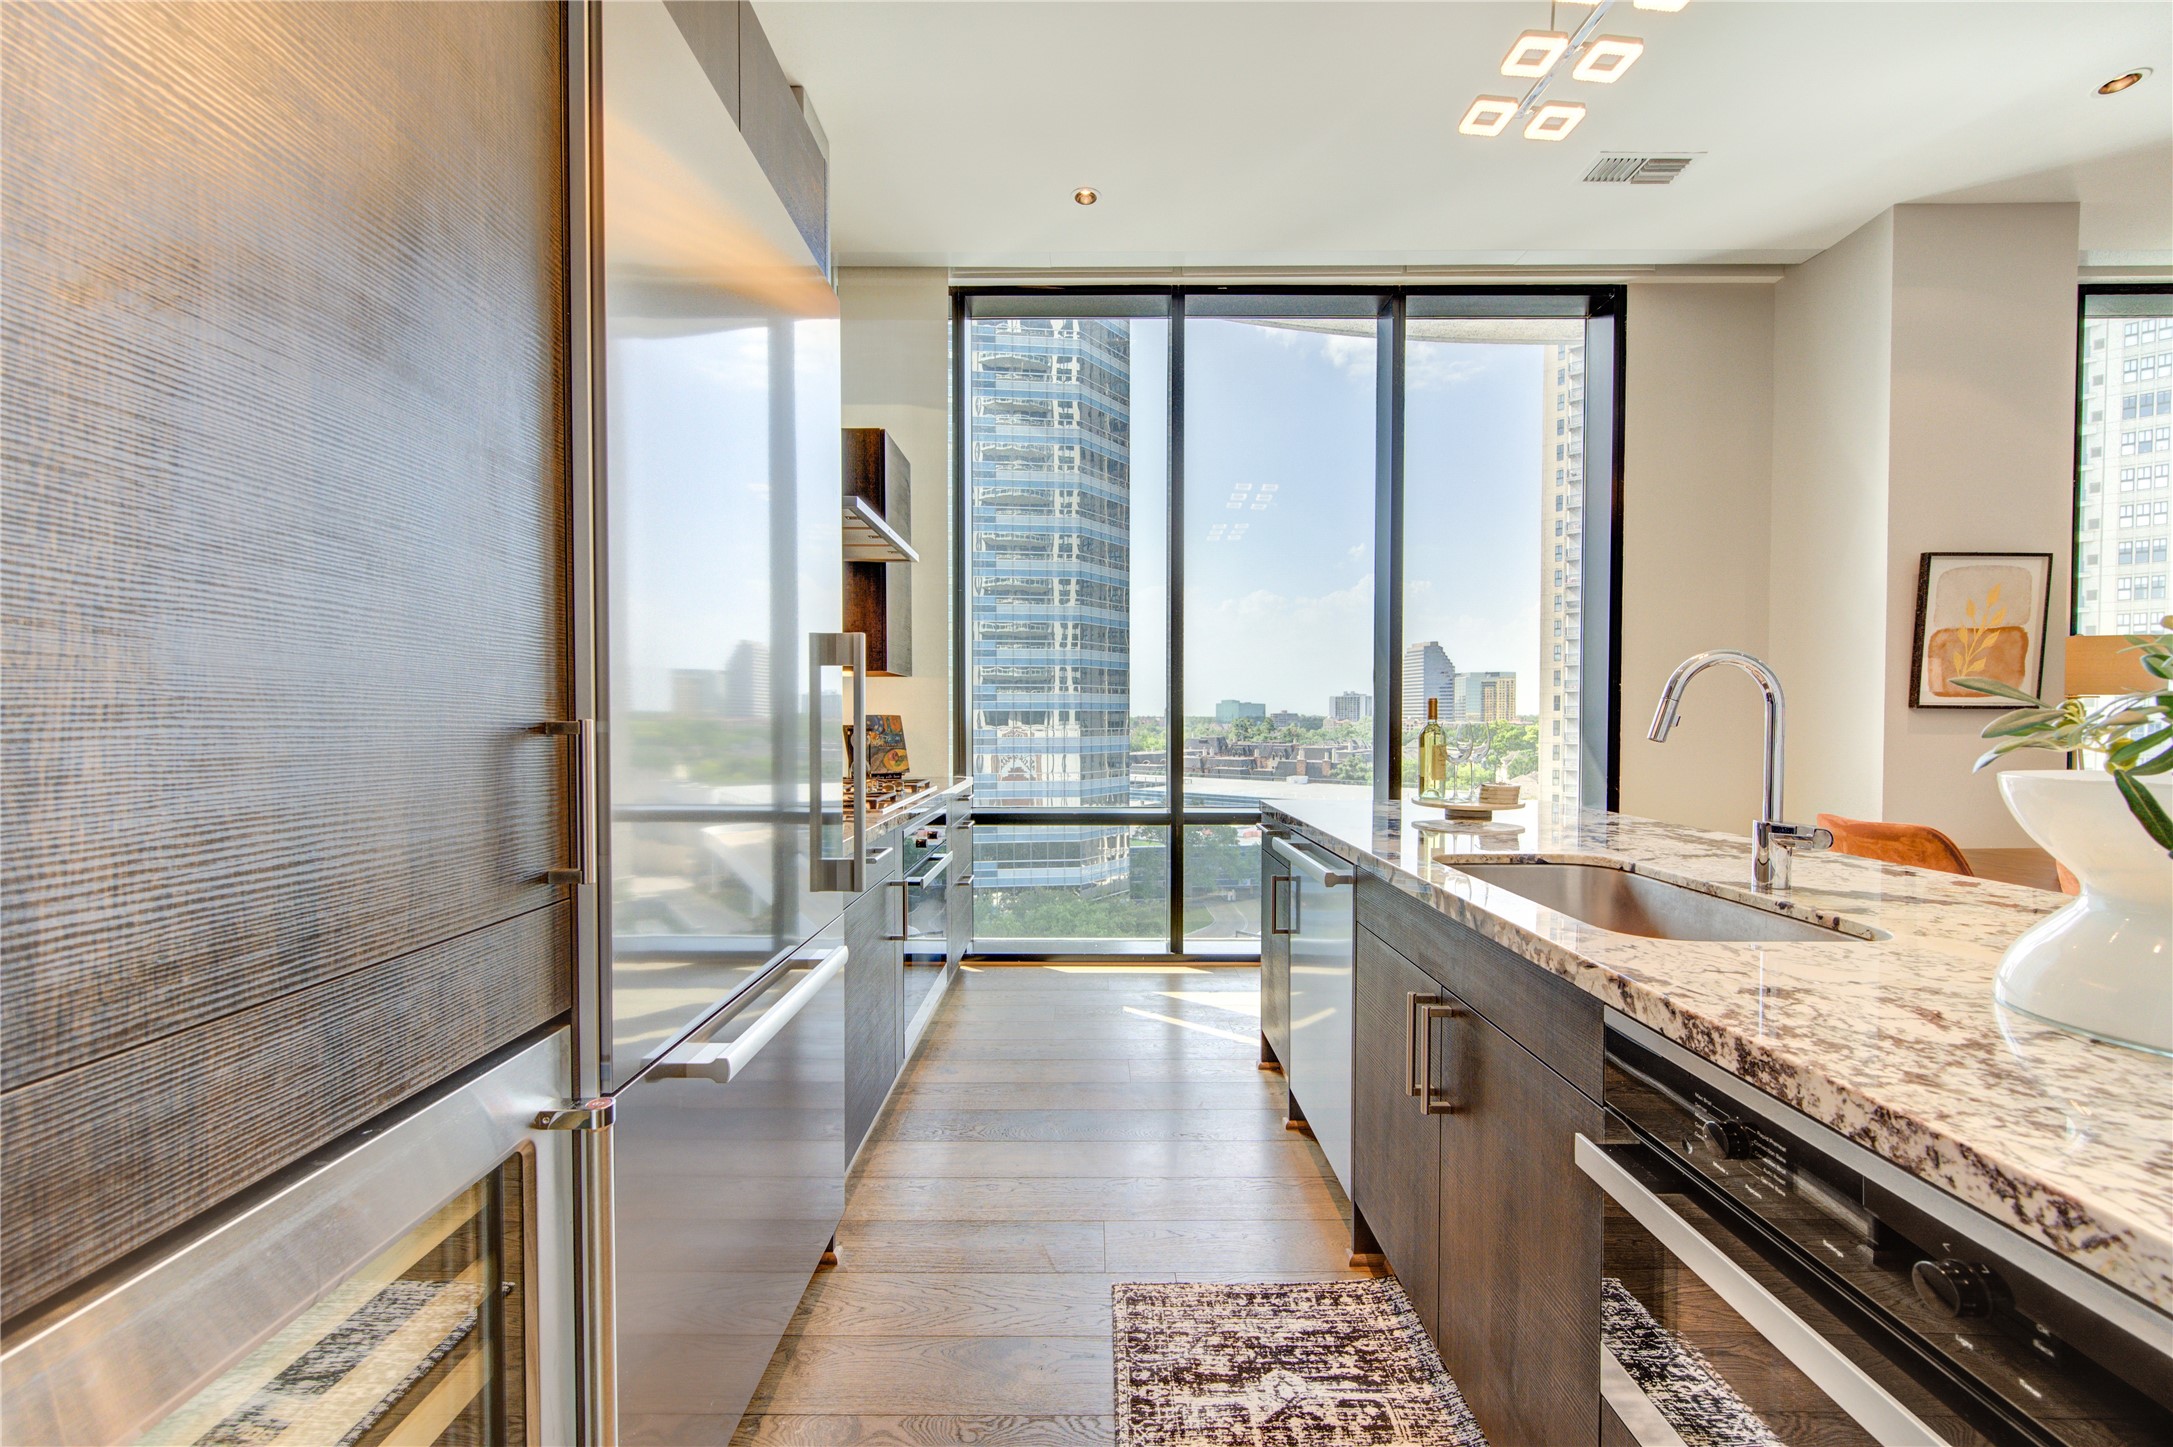 Take a look at the views from this gourmet kitchen complete with top of the line appliances. Entertain in style in this luxurious 2 bedroom high rise.